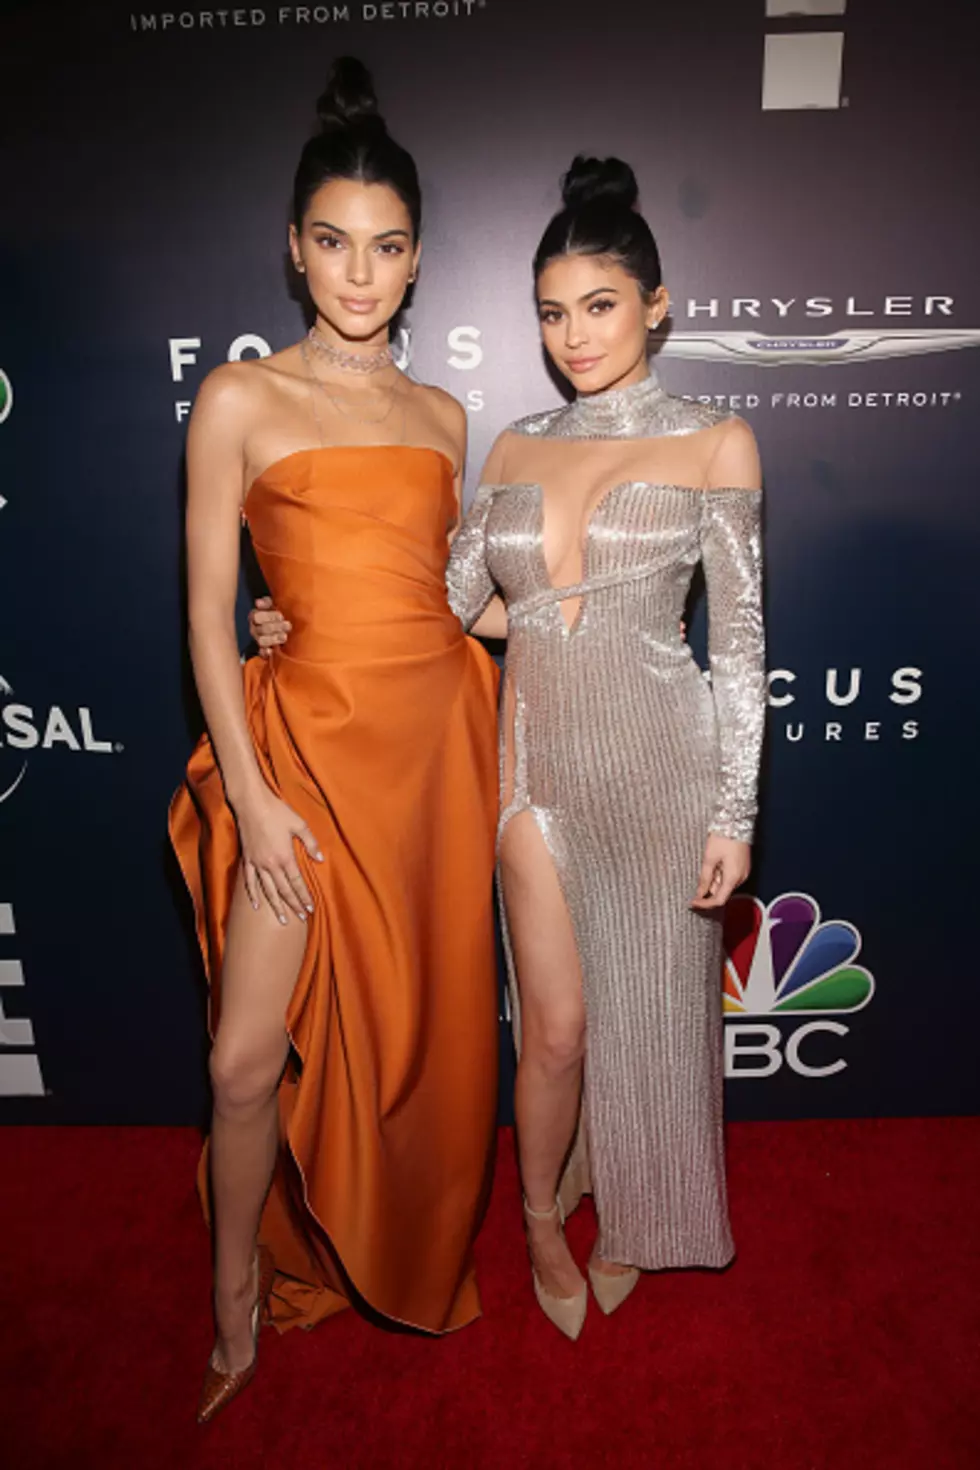 Kendall & Kylie Has Decided To Start Plus Size Line With Ashley Stewart